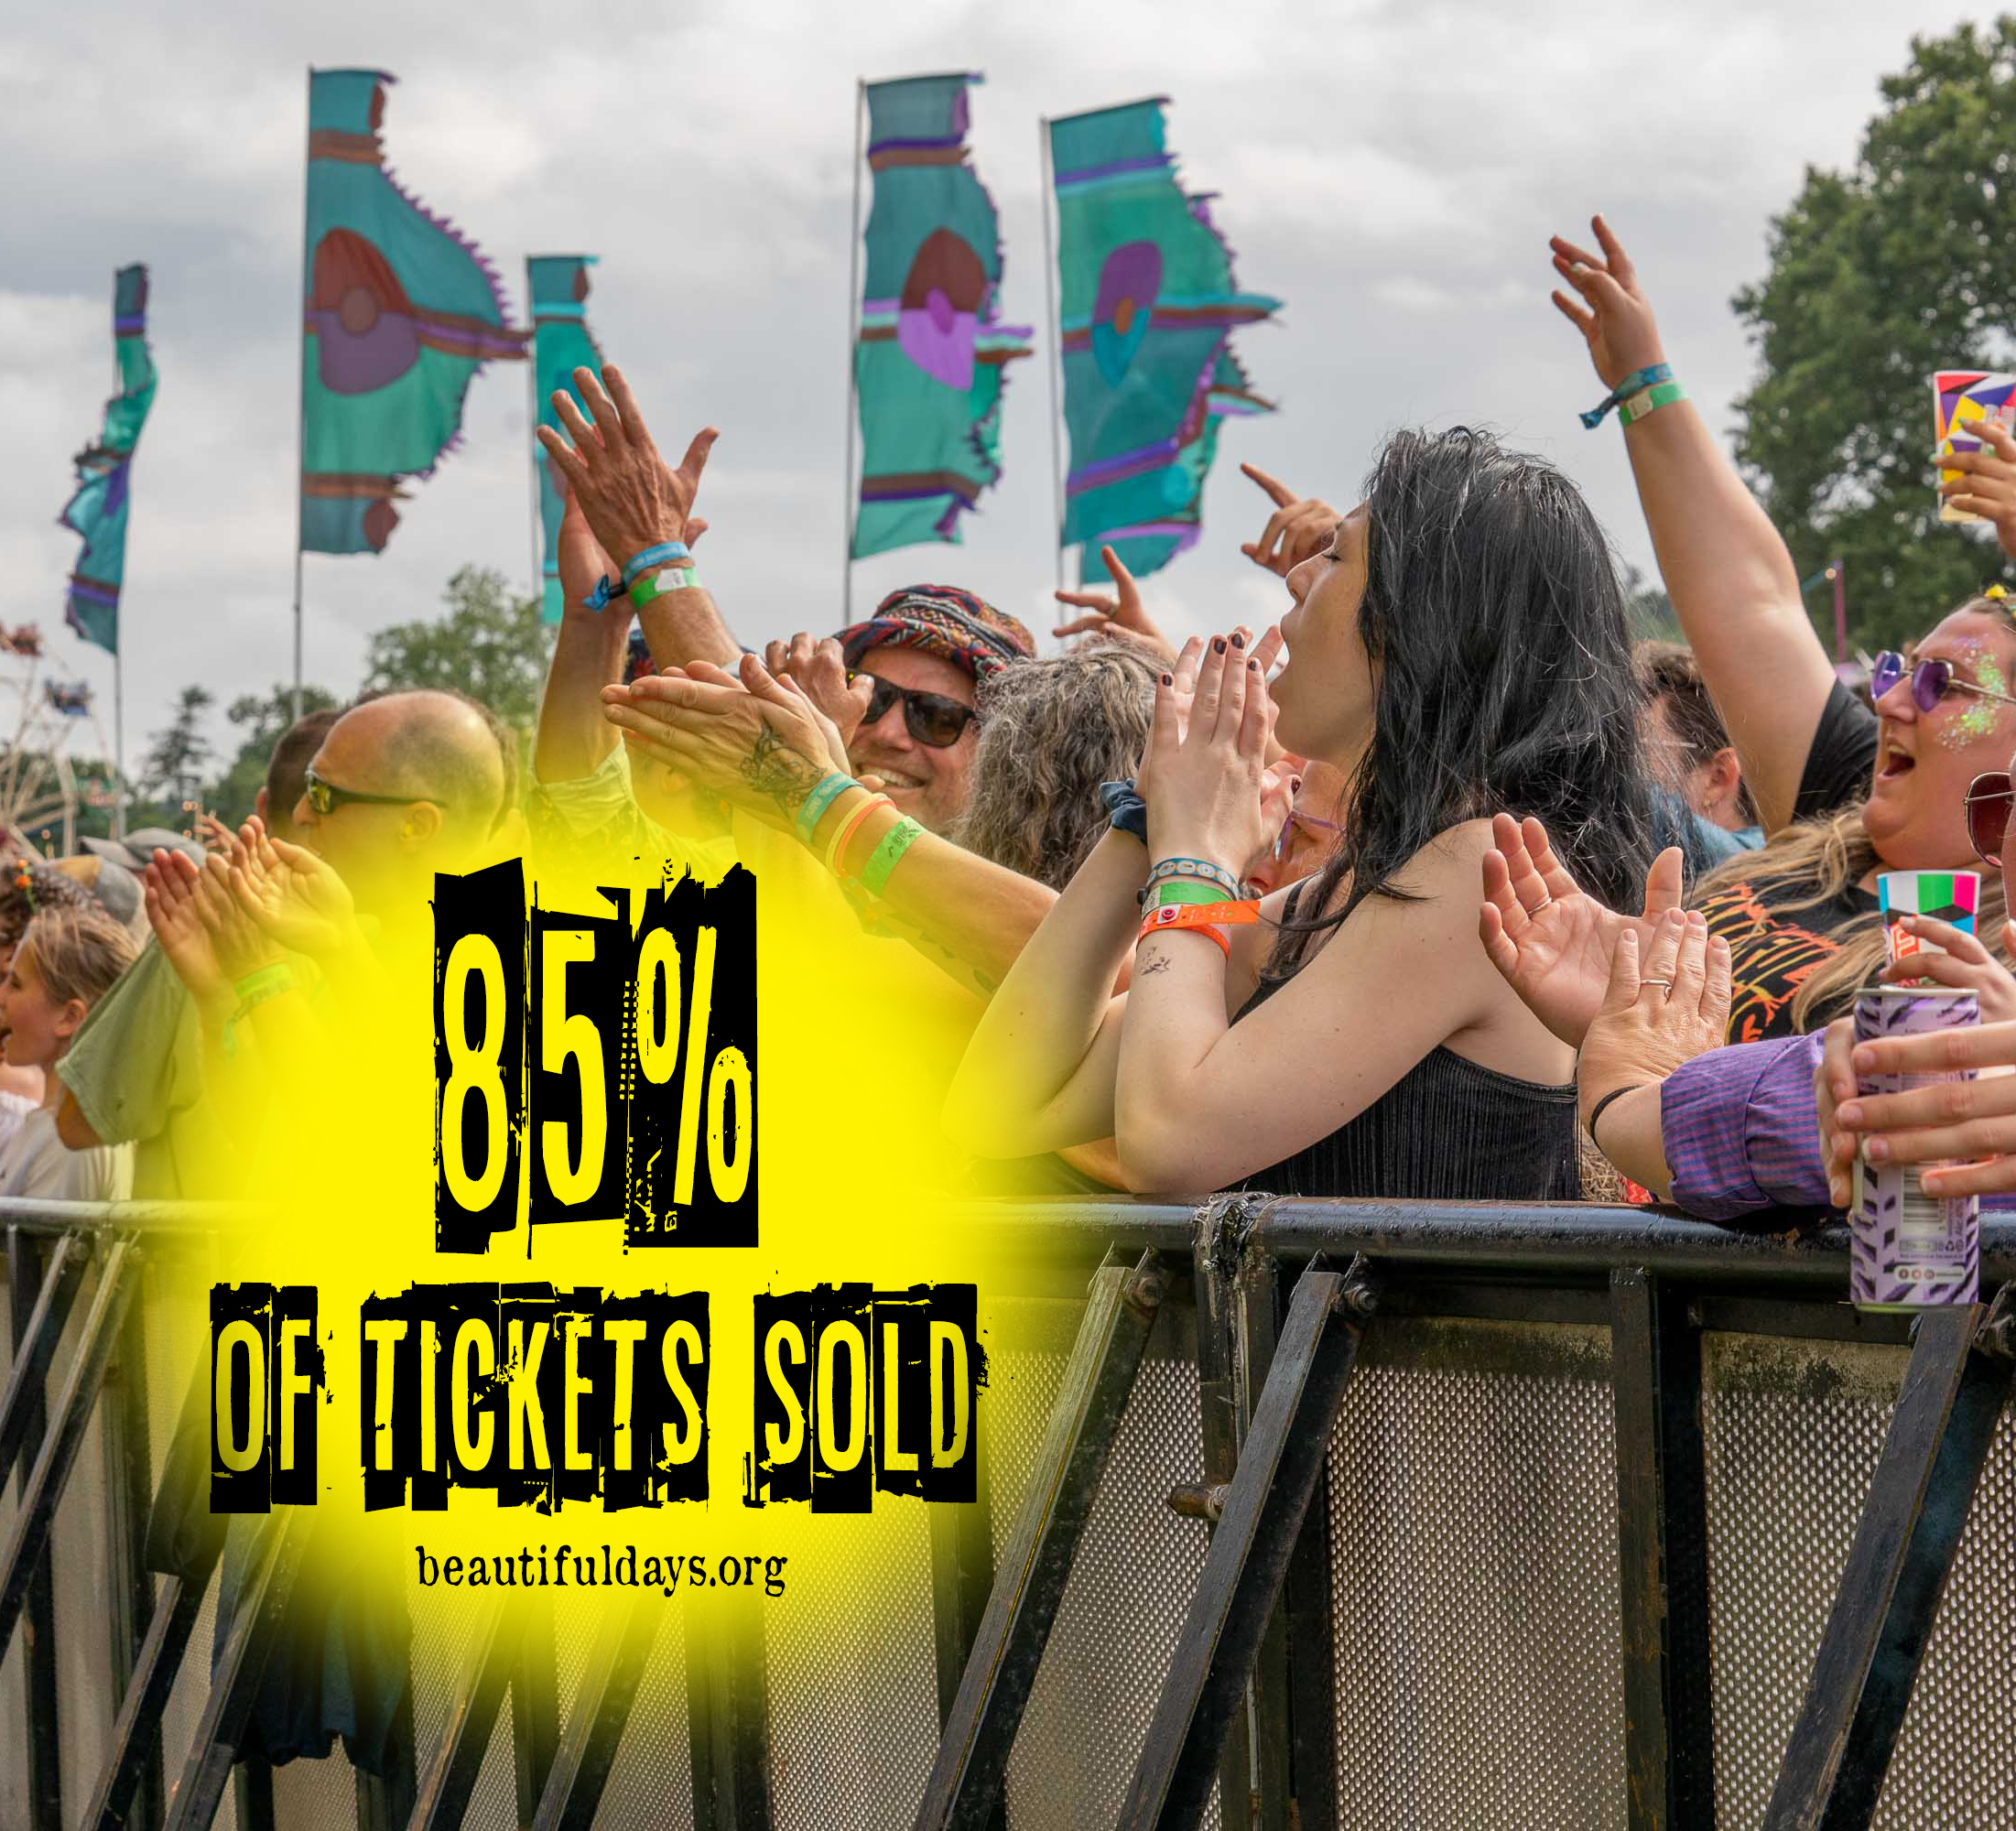 85% of tickets sold